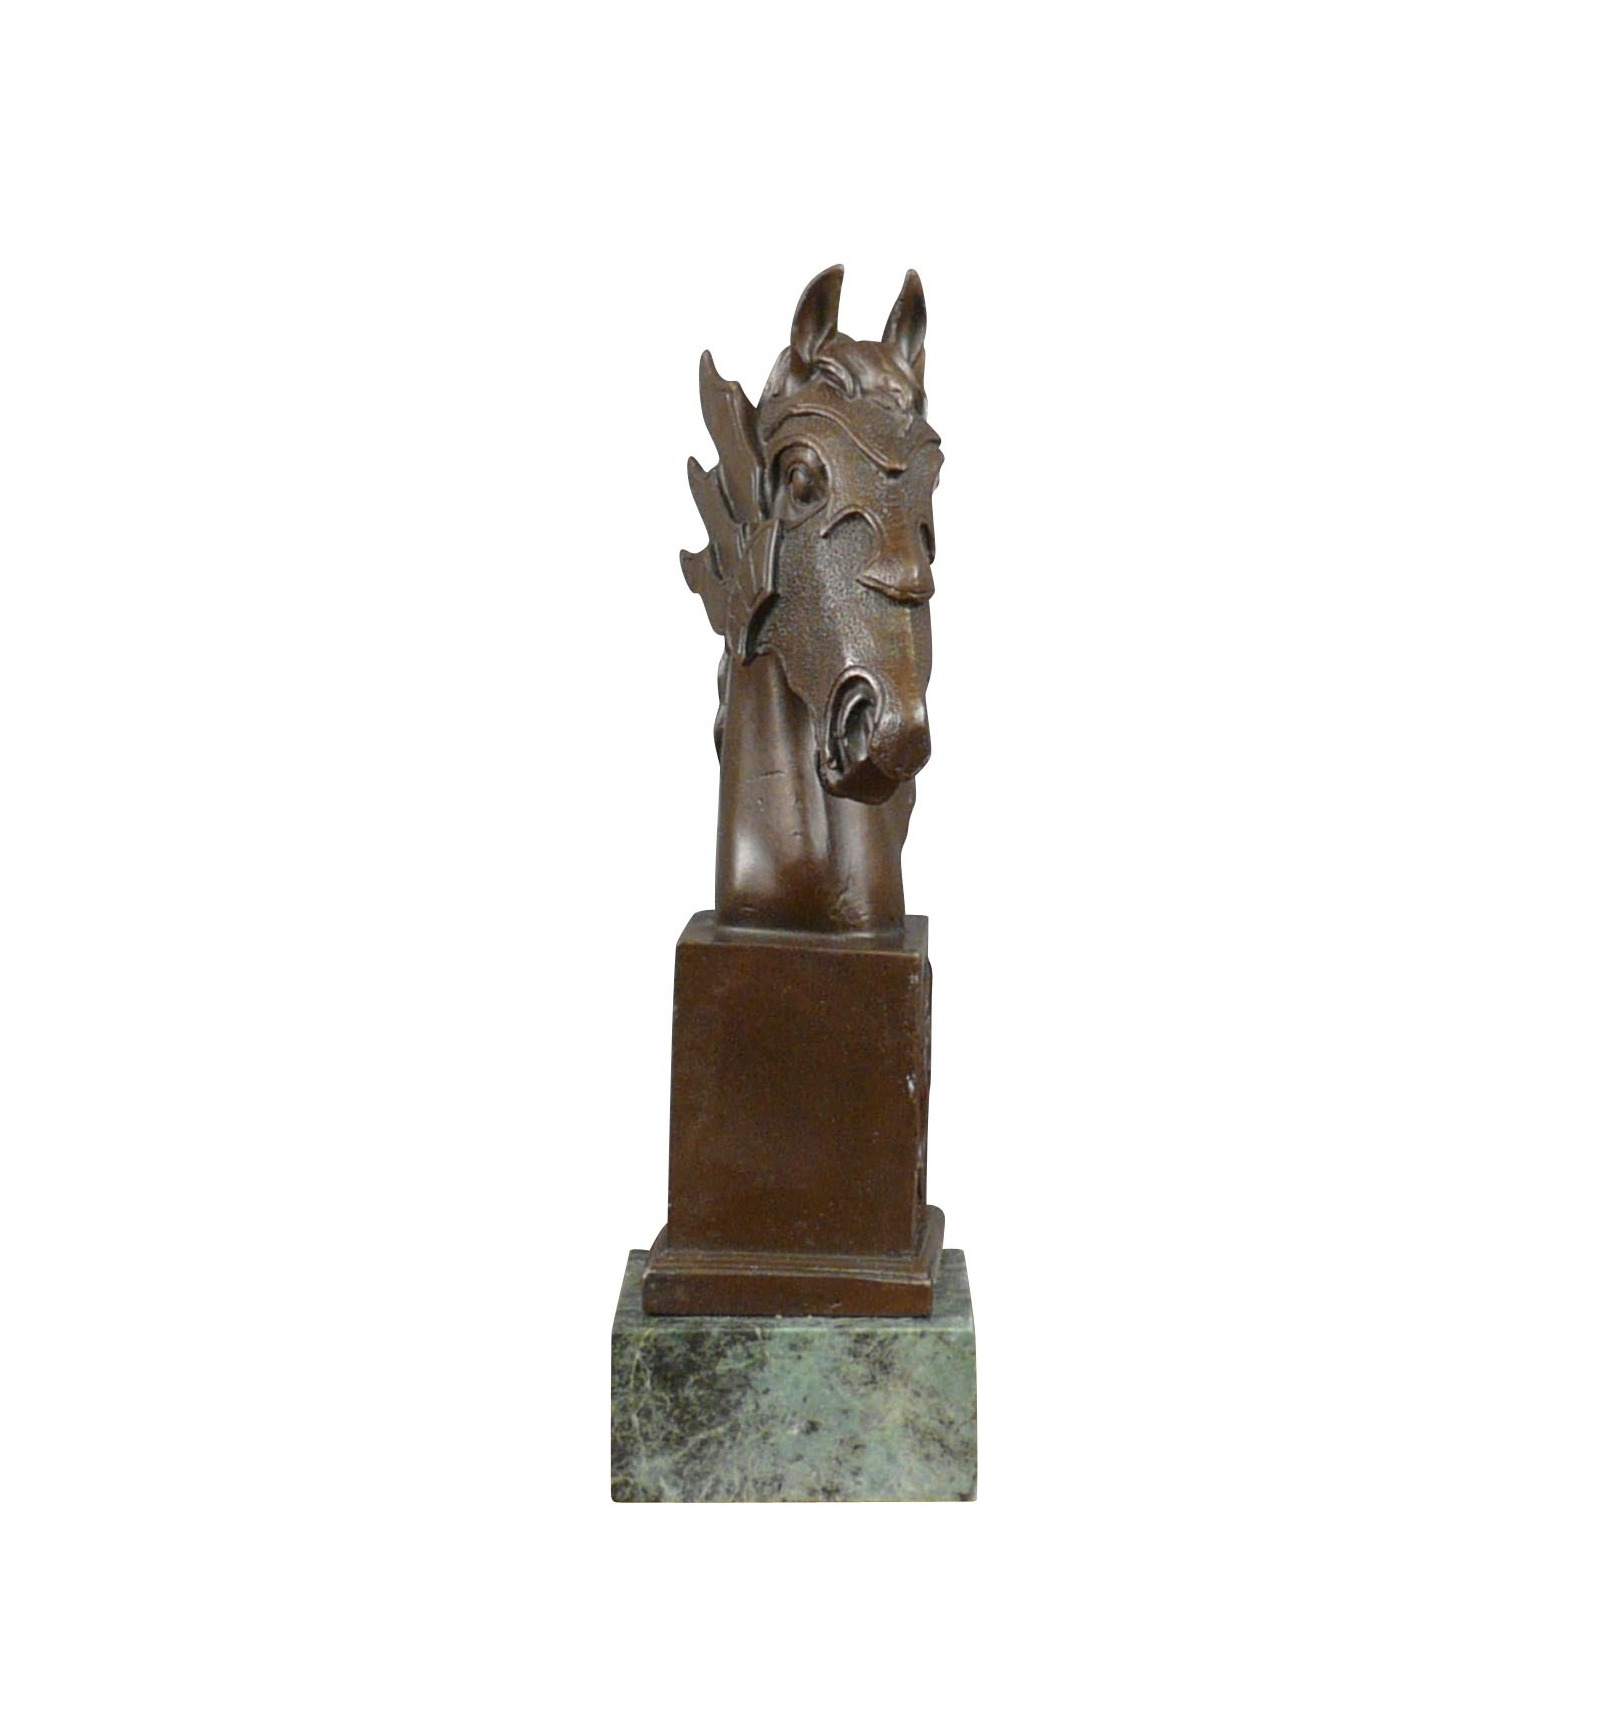 A bronze Statue of the bust of a horse Sculpture - horse